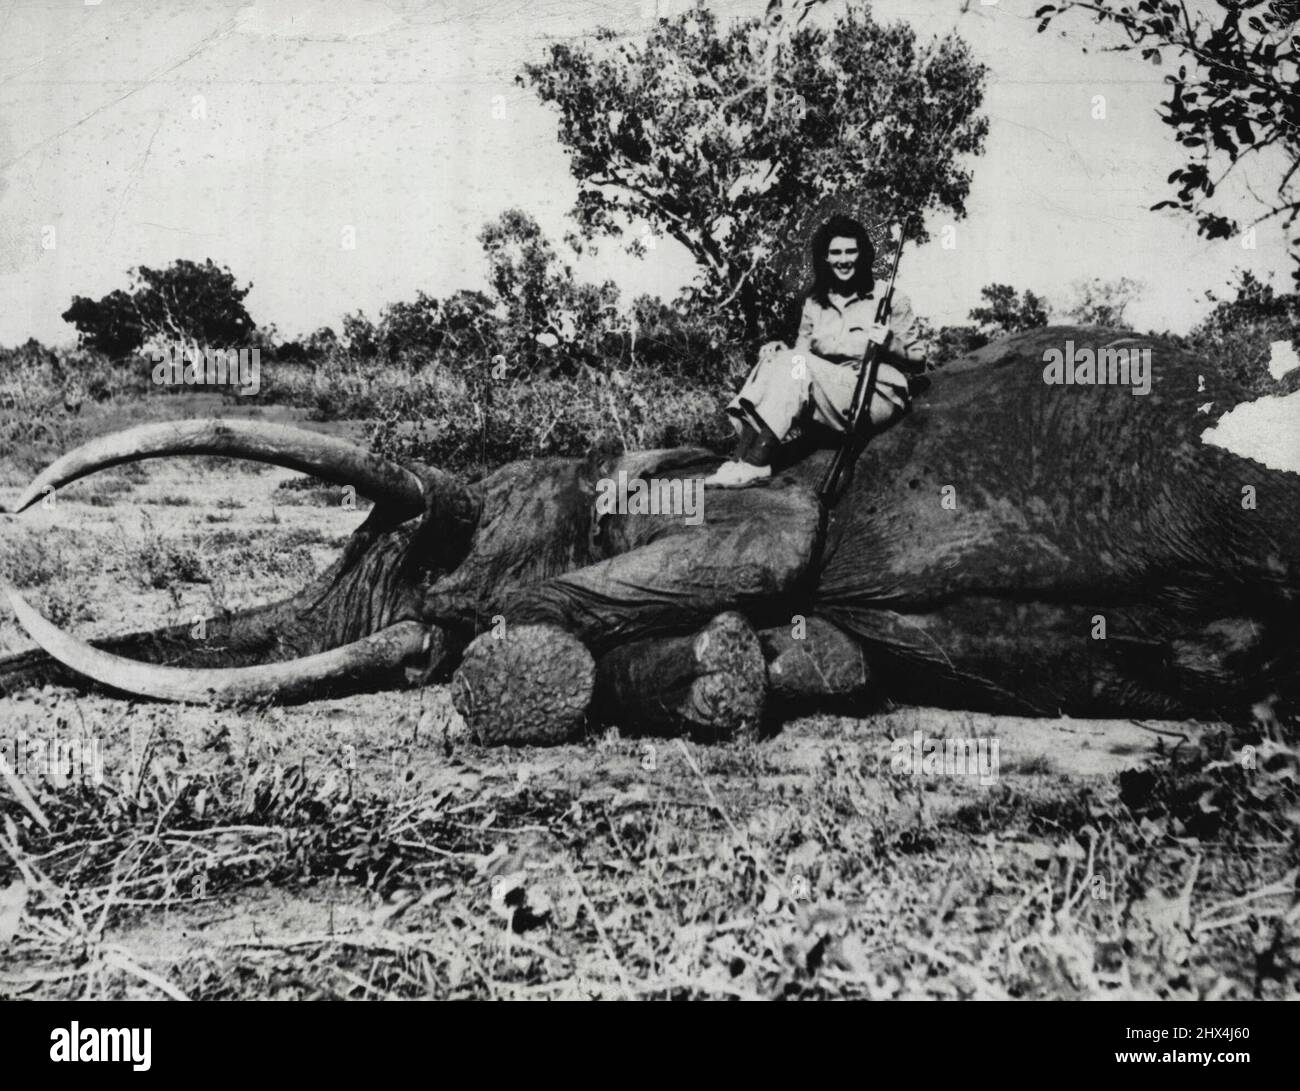 Young Huntress Bags Huge Elephant. Virginia Walton Brooks, 14-year-old daughter of Mr. and Mrs. Berry Boswell Brooks, of Memphis, Tenn., sits on a huge elephant she bagged, July 15, on her first big game hunt in Kenya Colony, East Africa. Virginia, who arrived in New York City, Aug. 21, with her parents, from Africa, carried a letter from the head game warden of Kenya Colony which said he believed her to be the youngest girl ever to shoot an elephant. August 22, 1947. (Photo by Associated Press Photo). Stock Photo